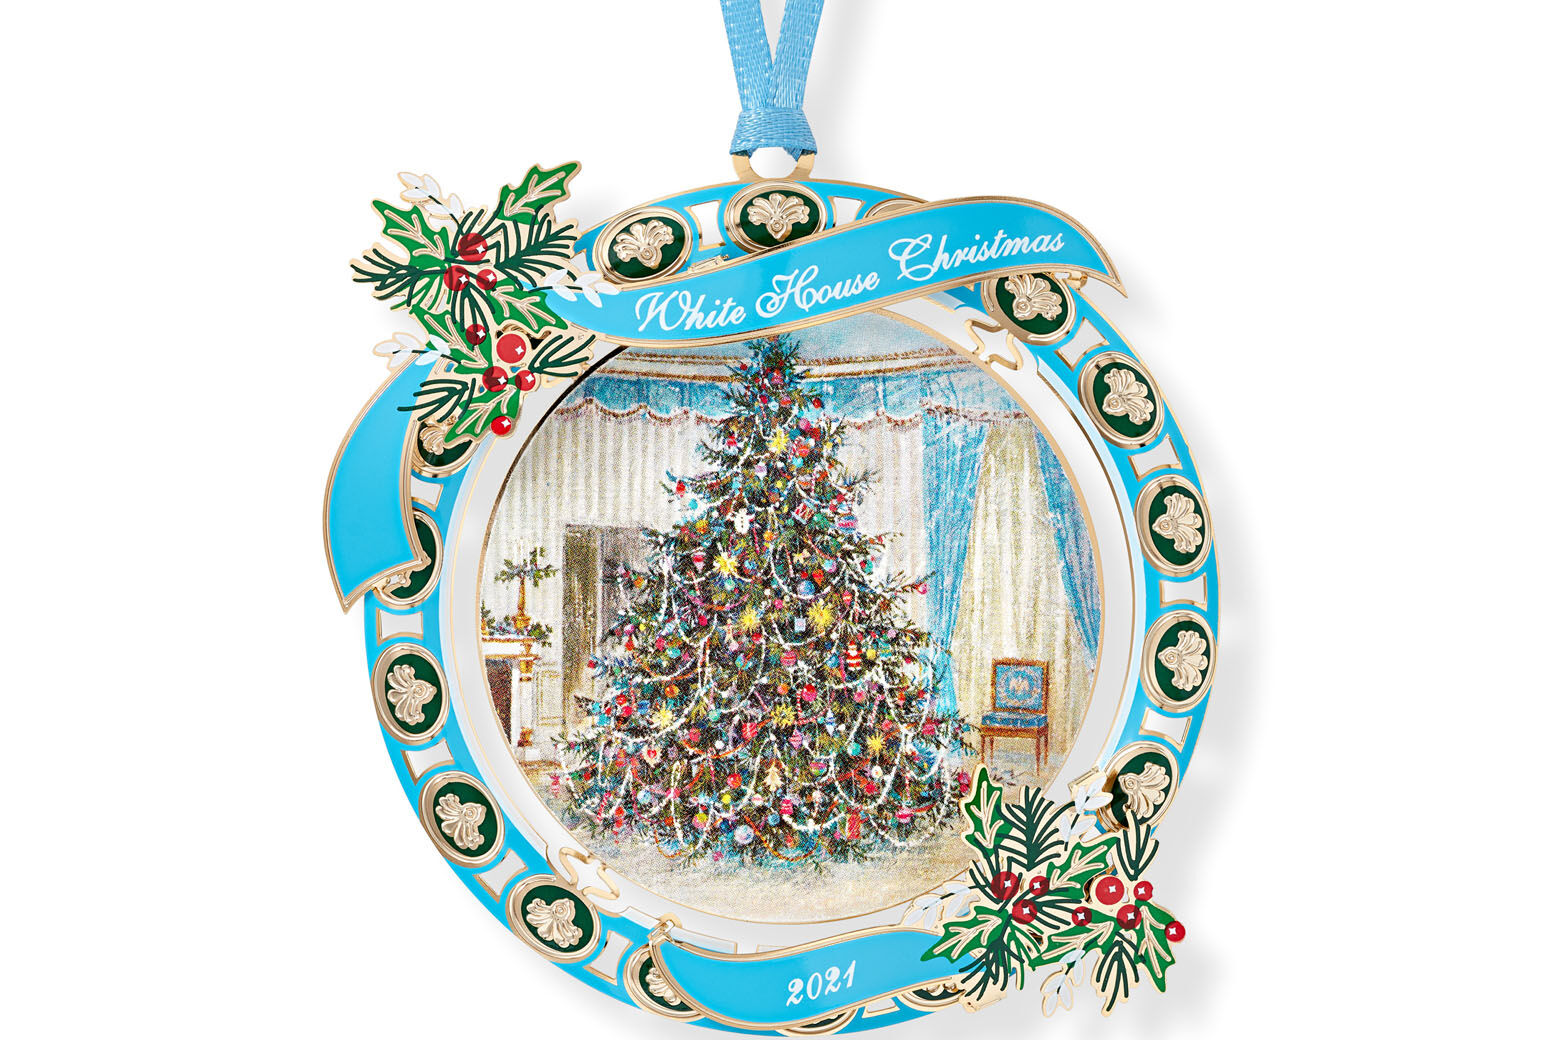 This photograph of the White House Historical Association’s Official White House Christmas Ornament was photographed by David Wiegold. The 2021 ornament honors Lyndon B. Johnson, the 36th President of the United States who took office on November 22, 1963 following the assassination of President John F. Kennedy.